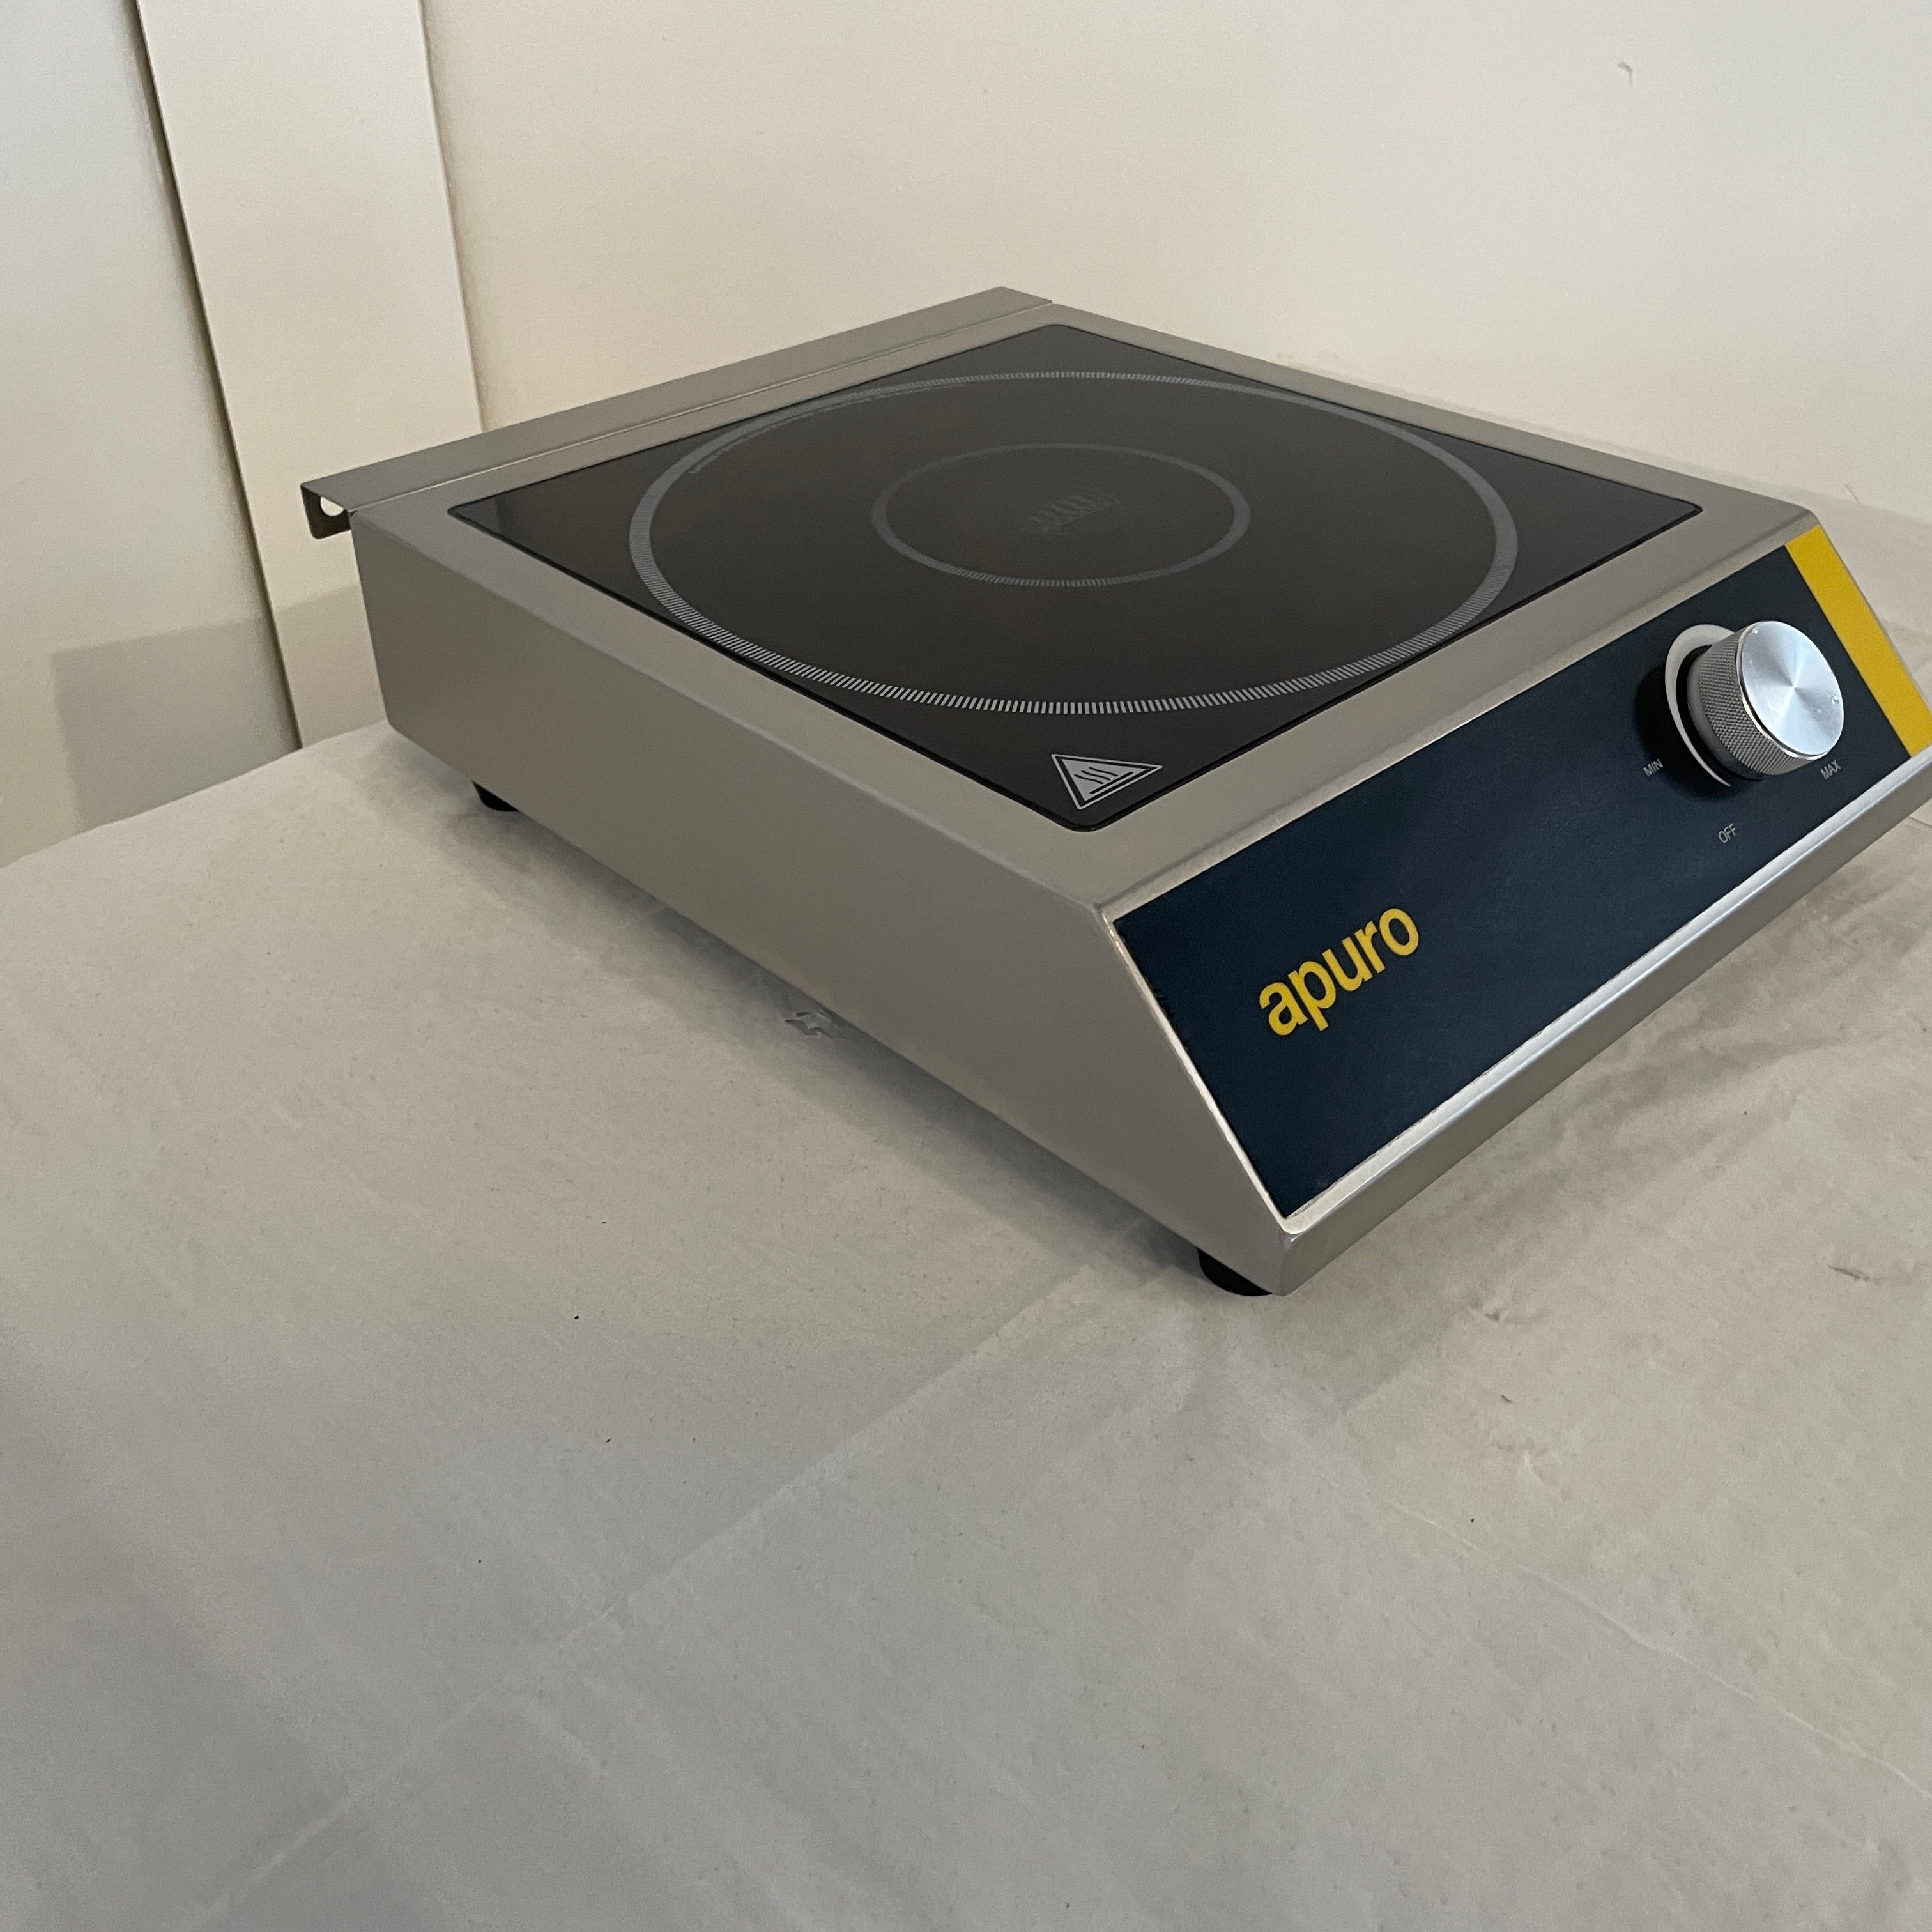 Thumbnail - Apuro CE208-A-03 Induction Cooker